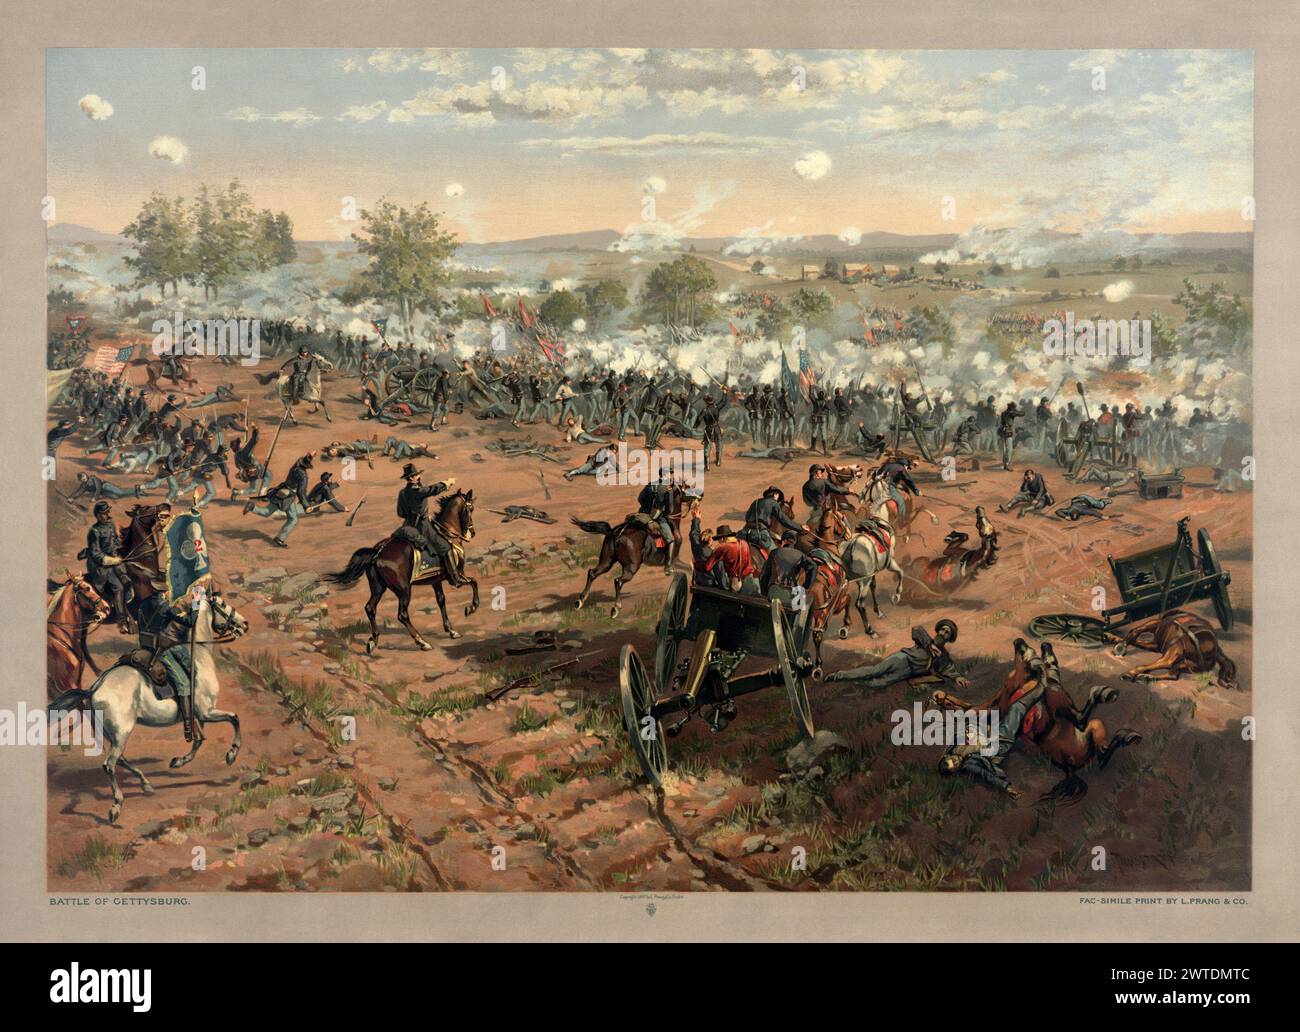 print of the painting 'Hancock at Gettysburg' by Thure de Thulstrup, showing Pickett's Charge. Stock Photo